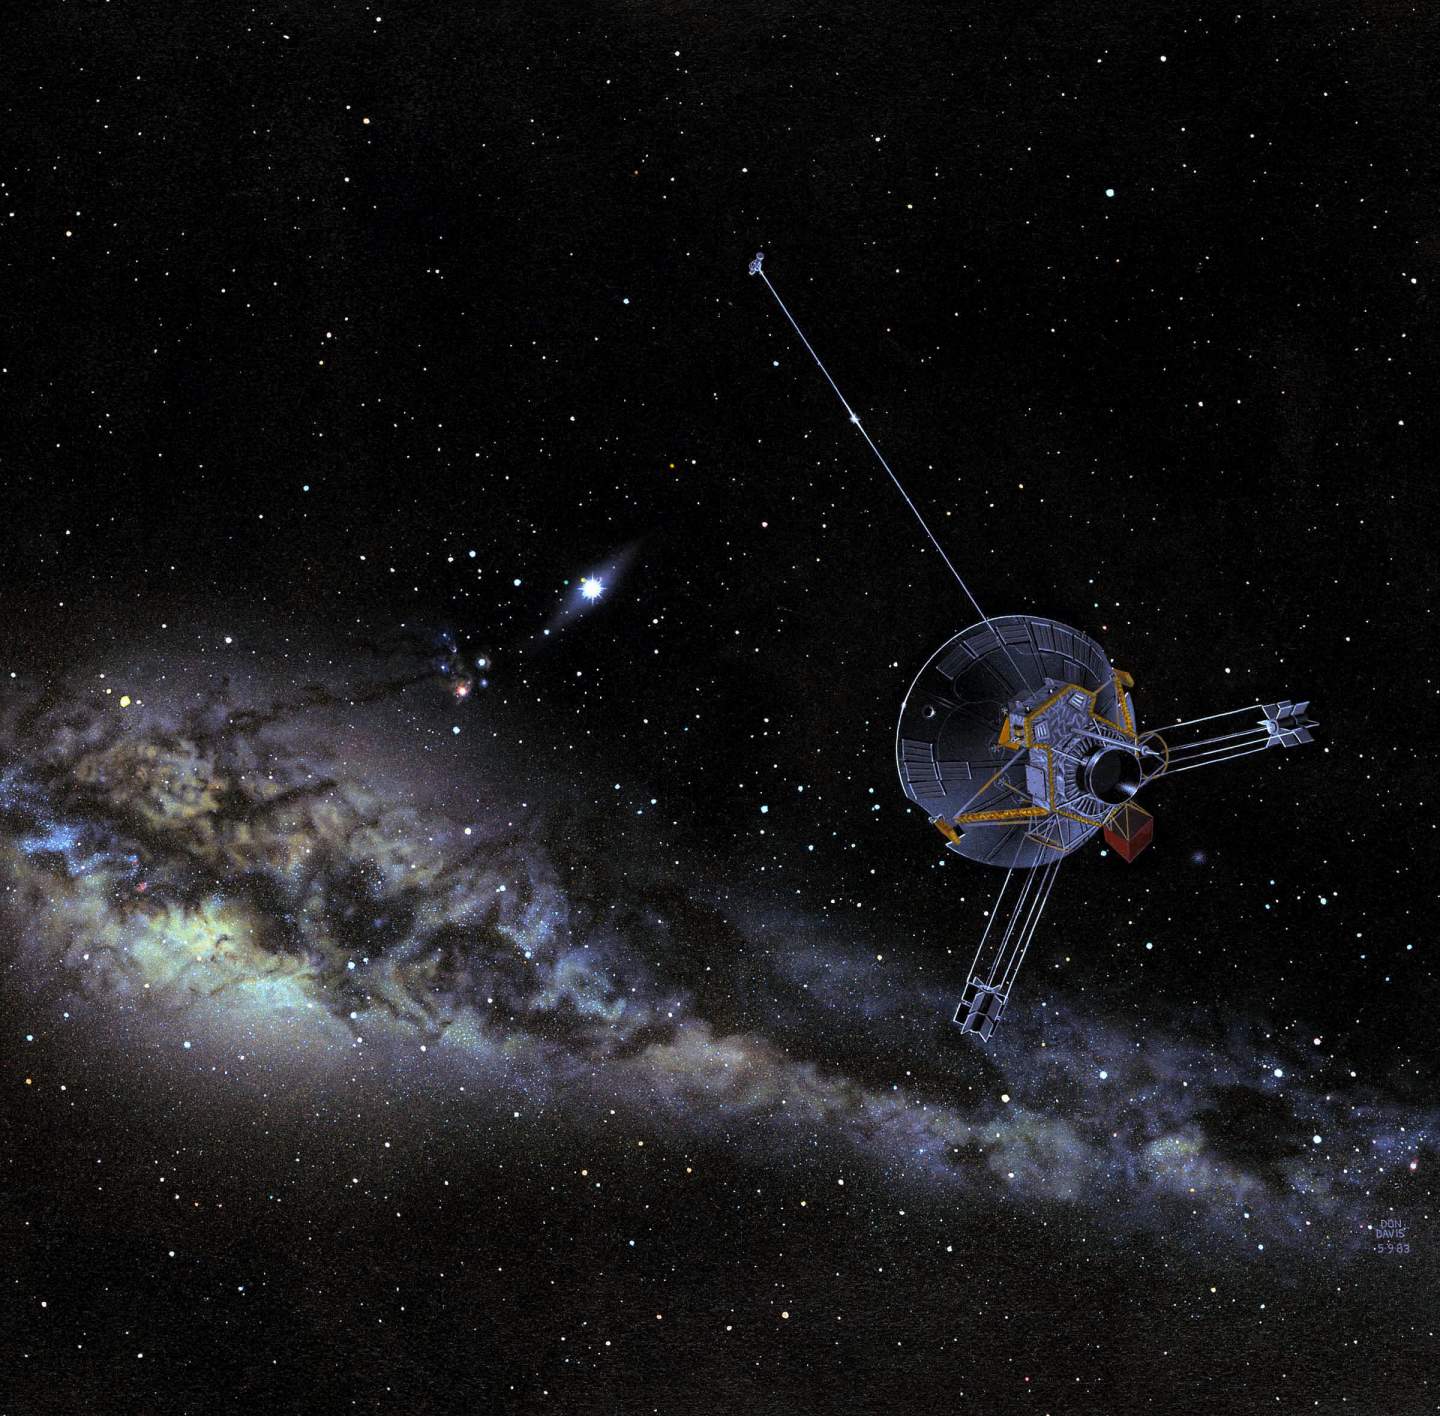 One last time. Today in 2003, Pioneer 10 phoned home for the last time. It was 7.6 billion miles away from Earth. Traveling at the speed of light, Pioneer's signal was very weak and took 11 hours to reach Earth: